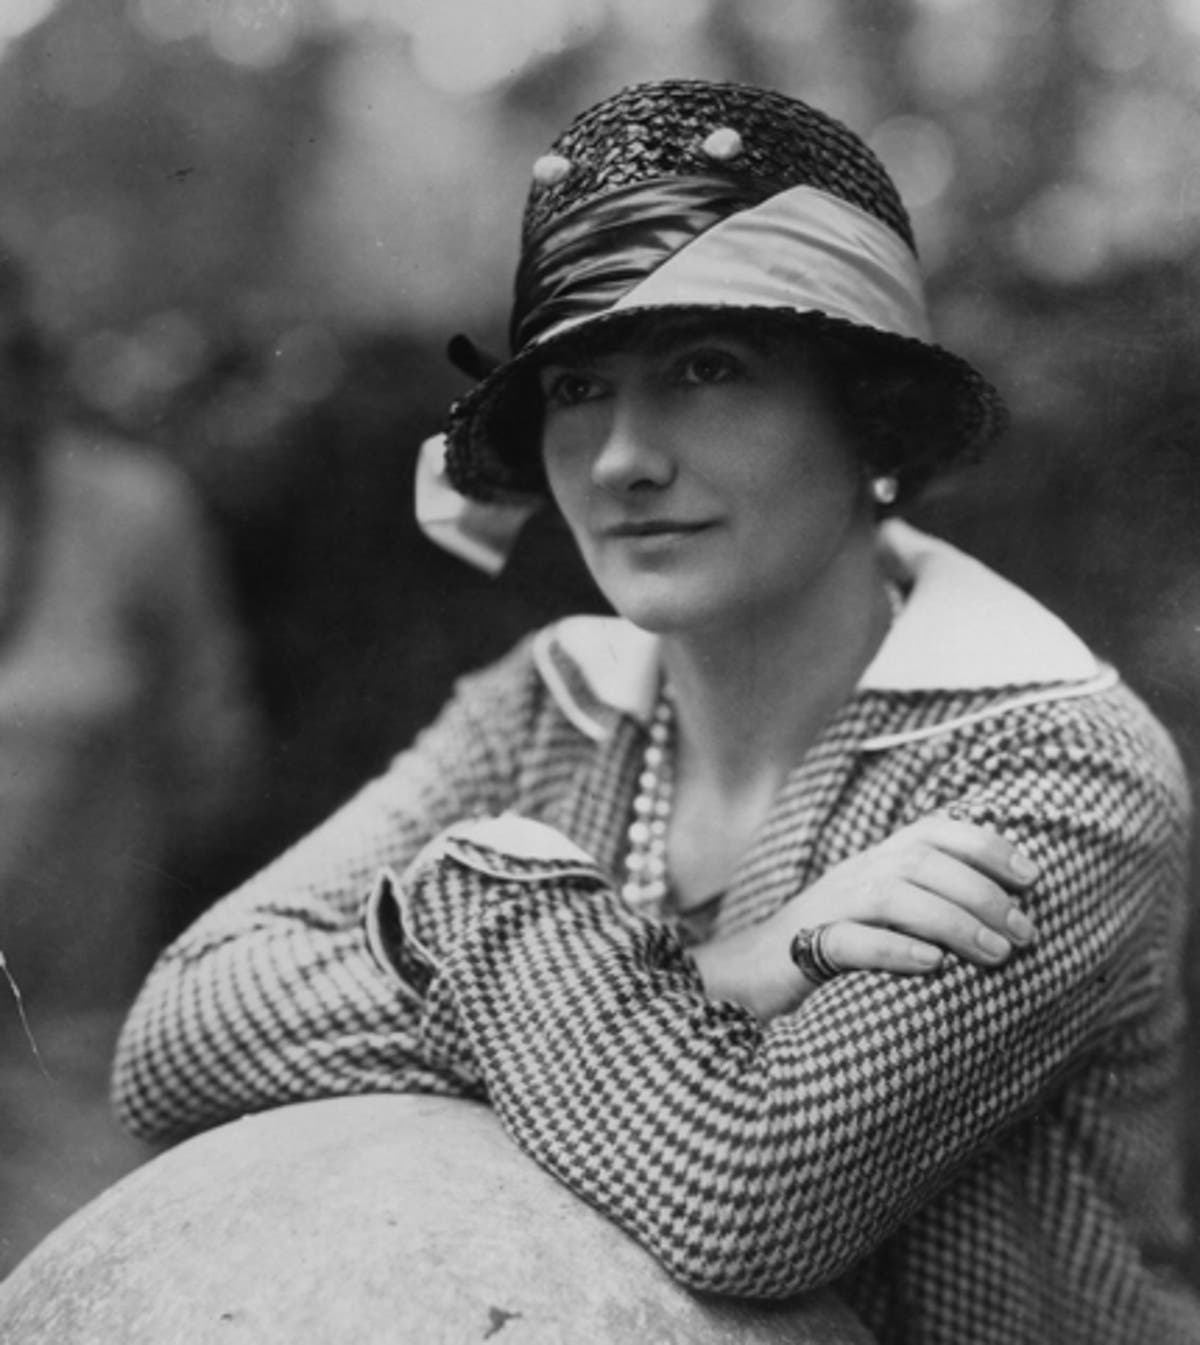 The 1920s: when Chanel changed everything - The Perfume Society